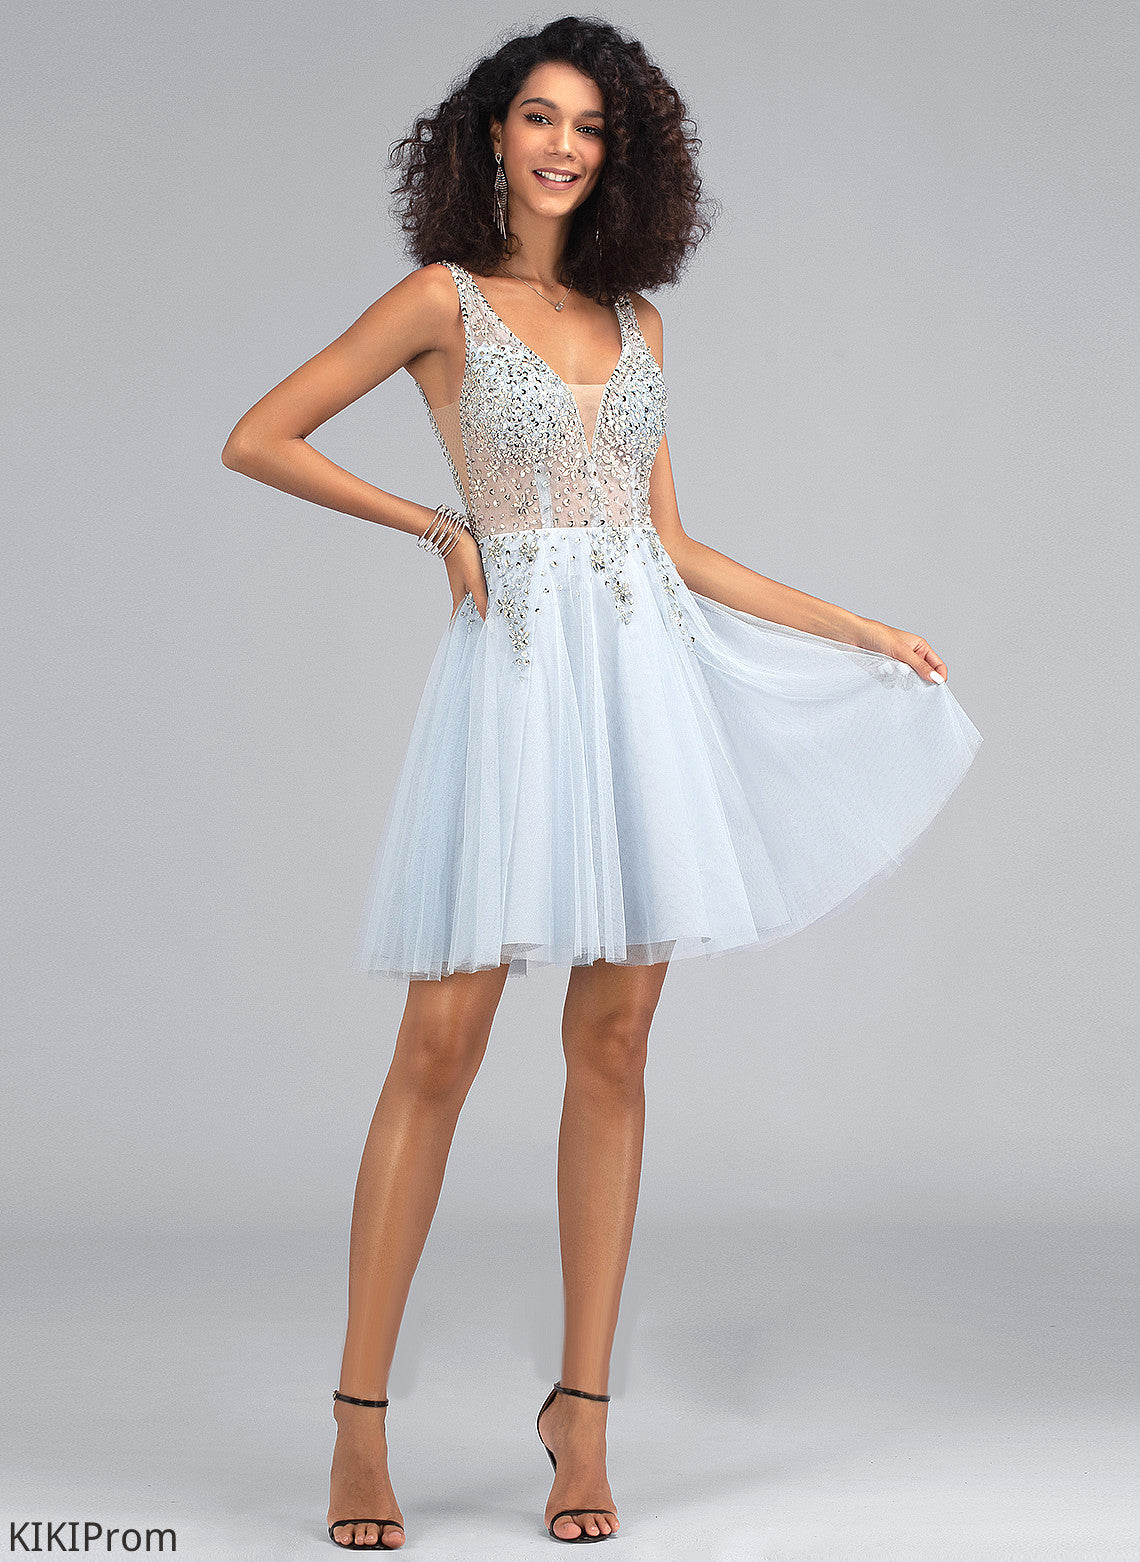 Beading With Short/Mini Amirah Dress A-Line Sequins V-neck Homecoming Dresses Homecoming Tulle